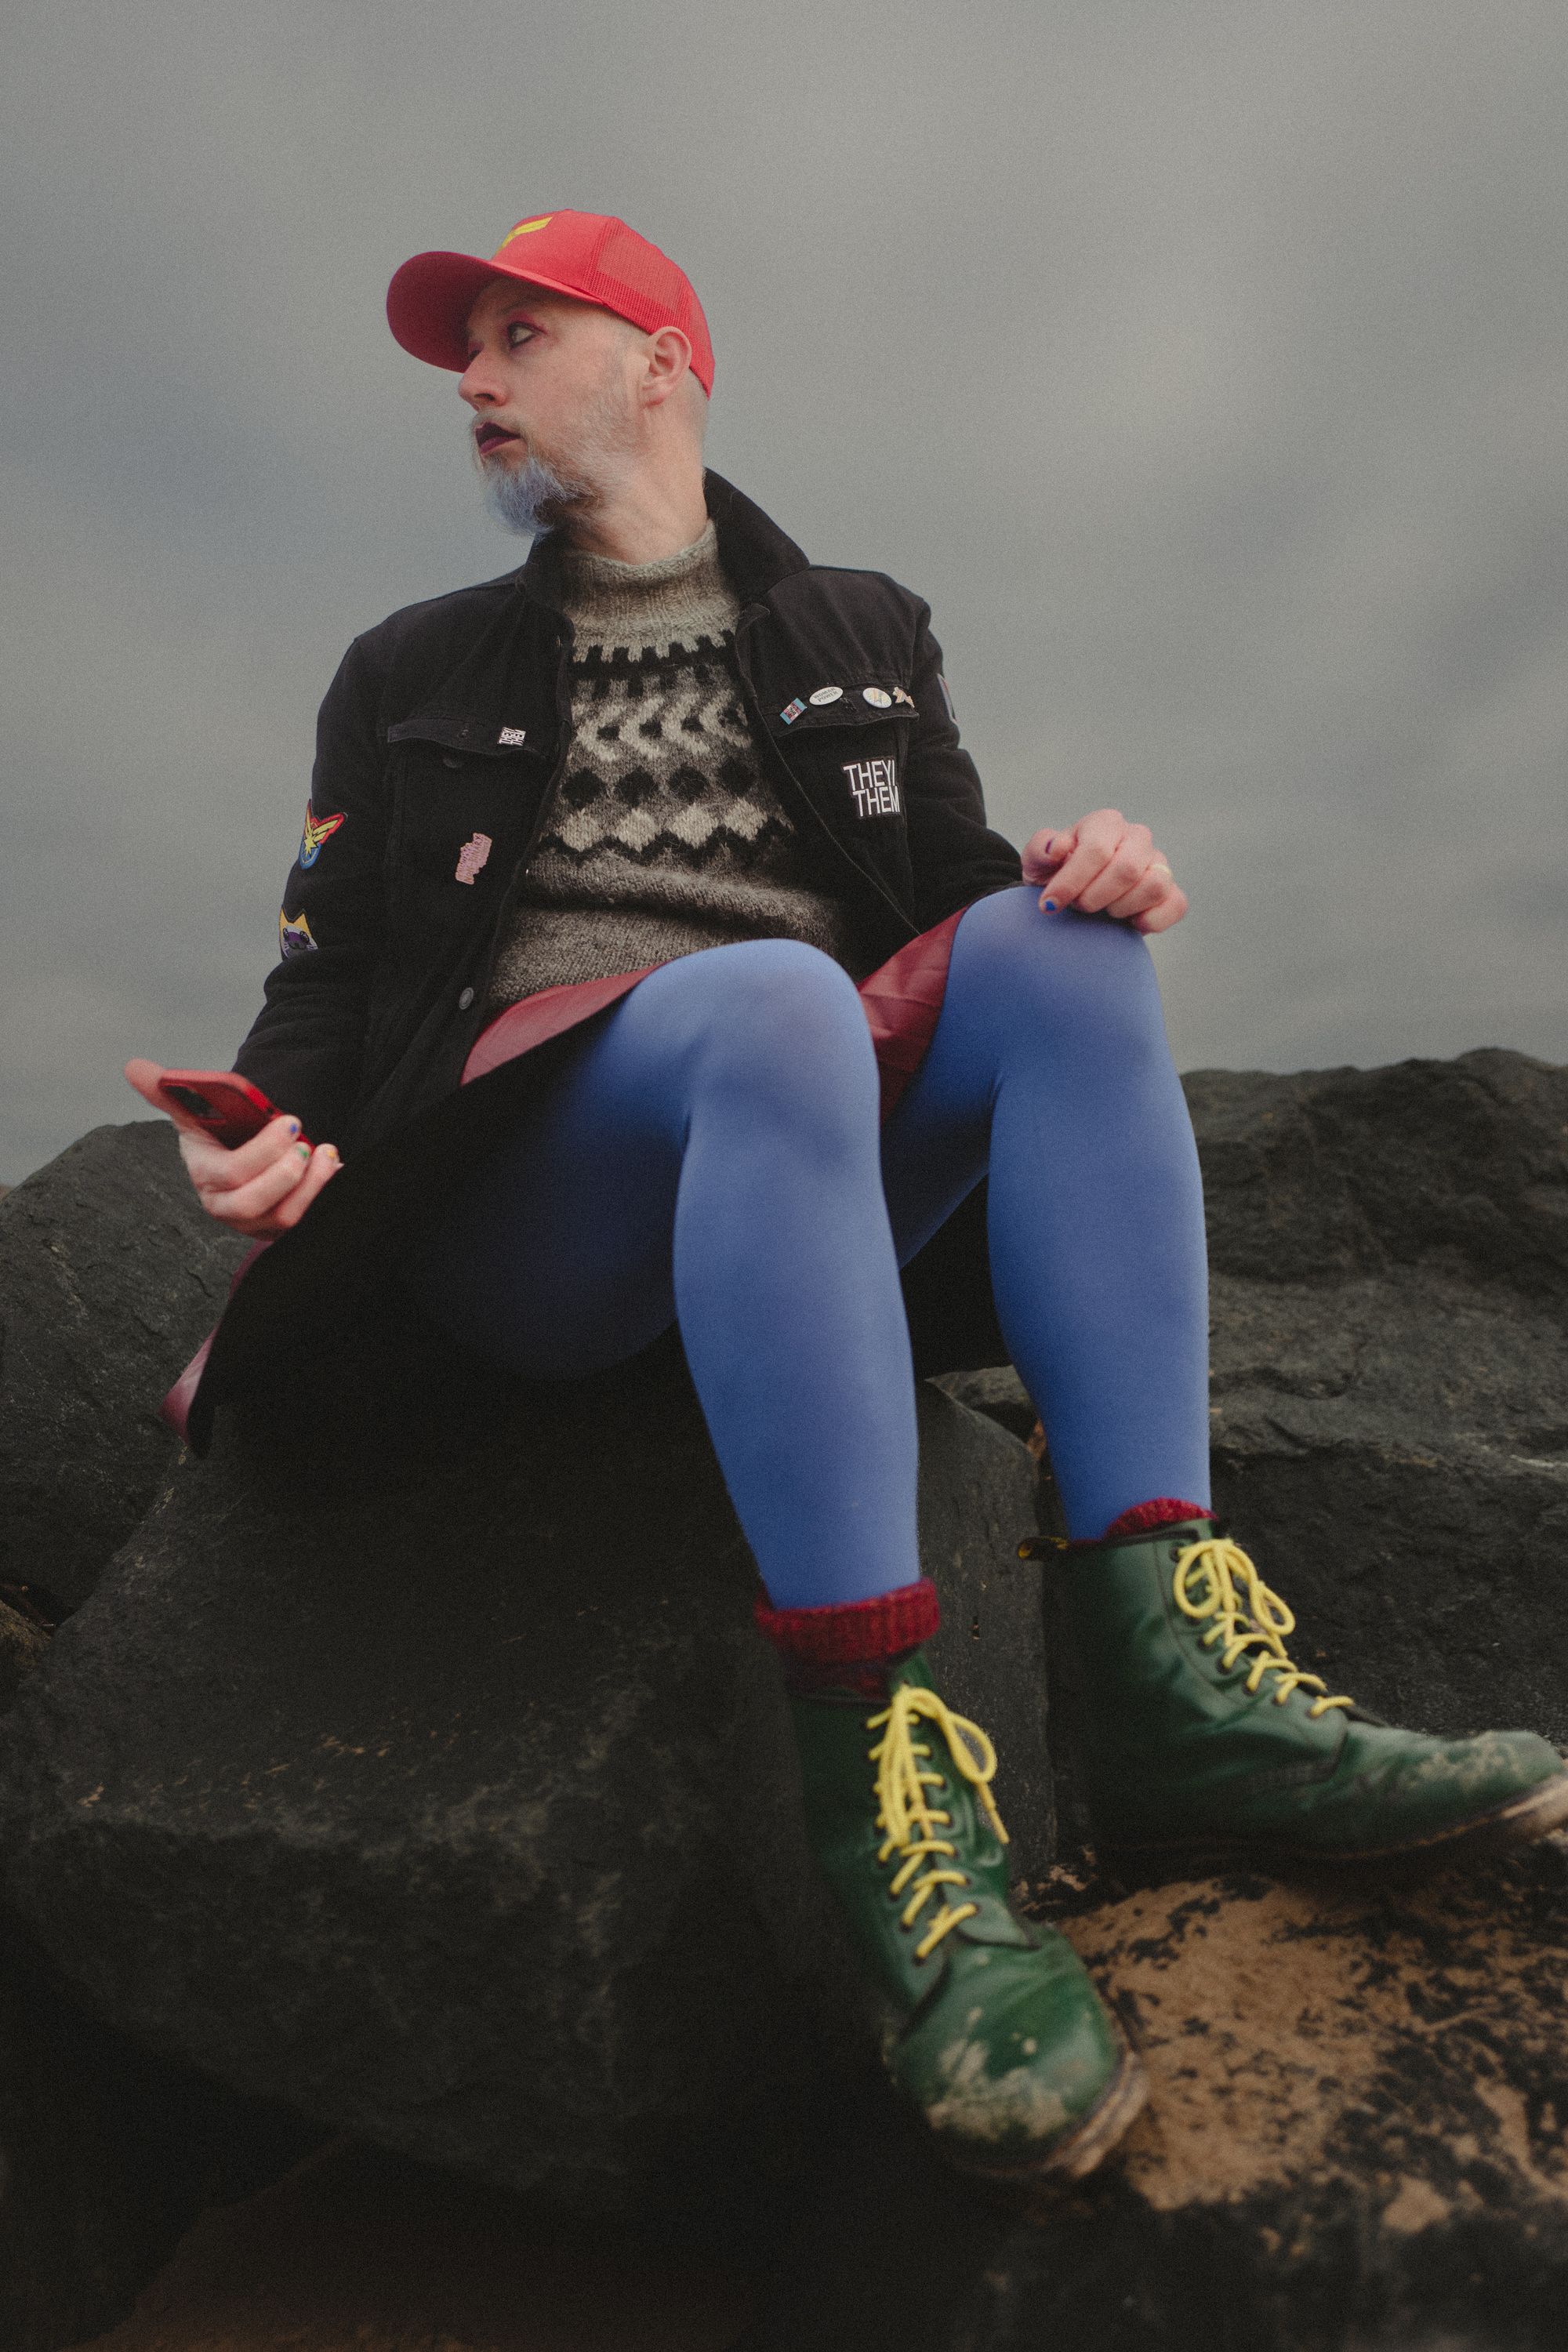 Non-binary person wearing black denim jacket, green boots, red skirt, blue tights and a red cap sat on rocks.